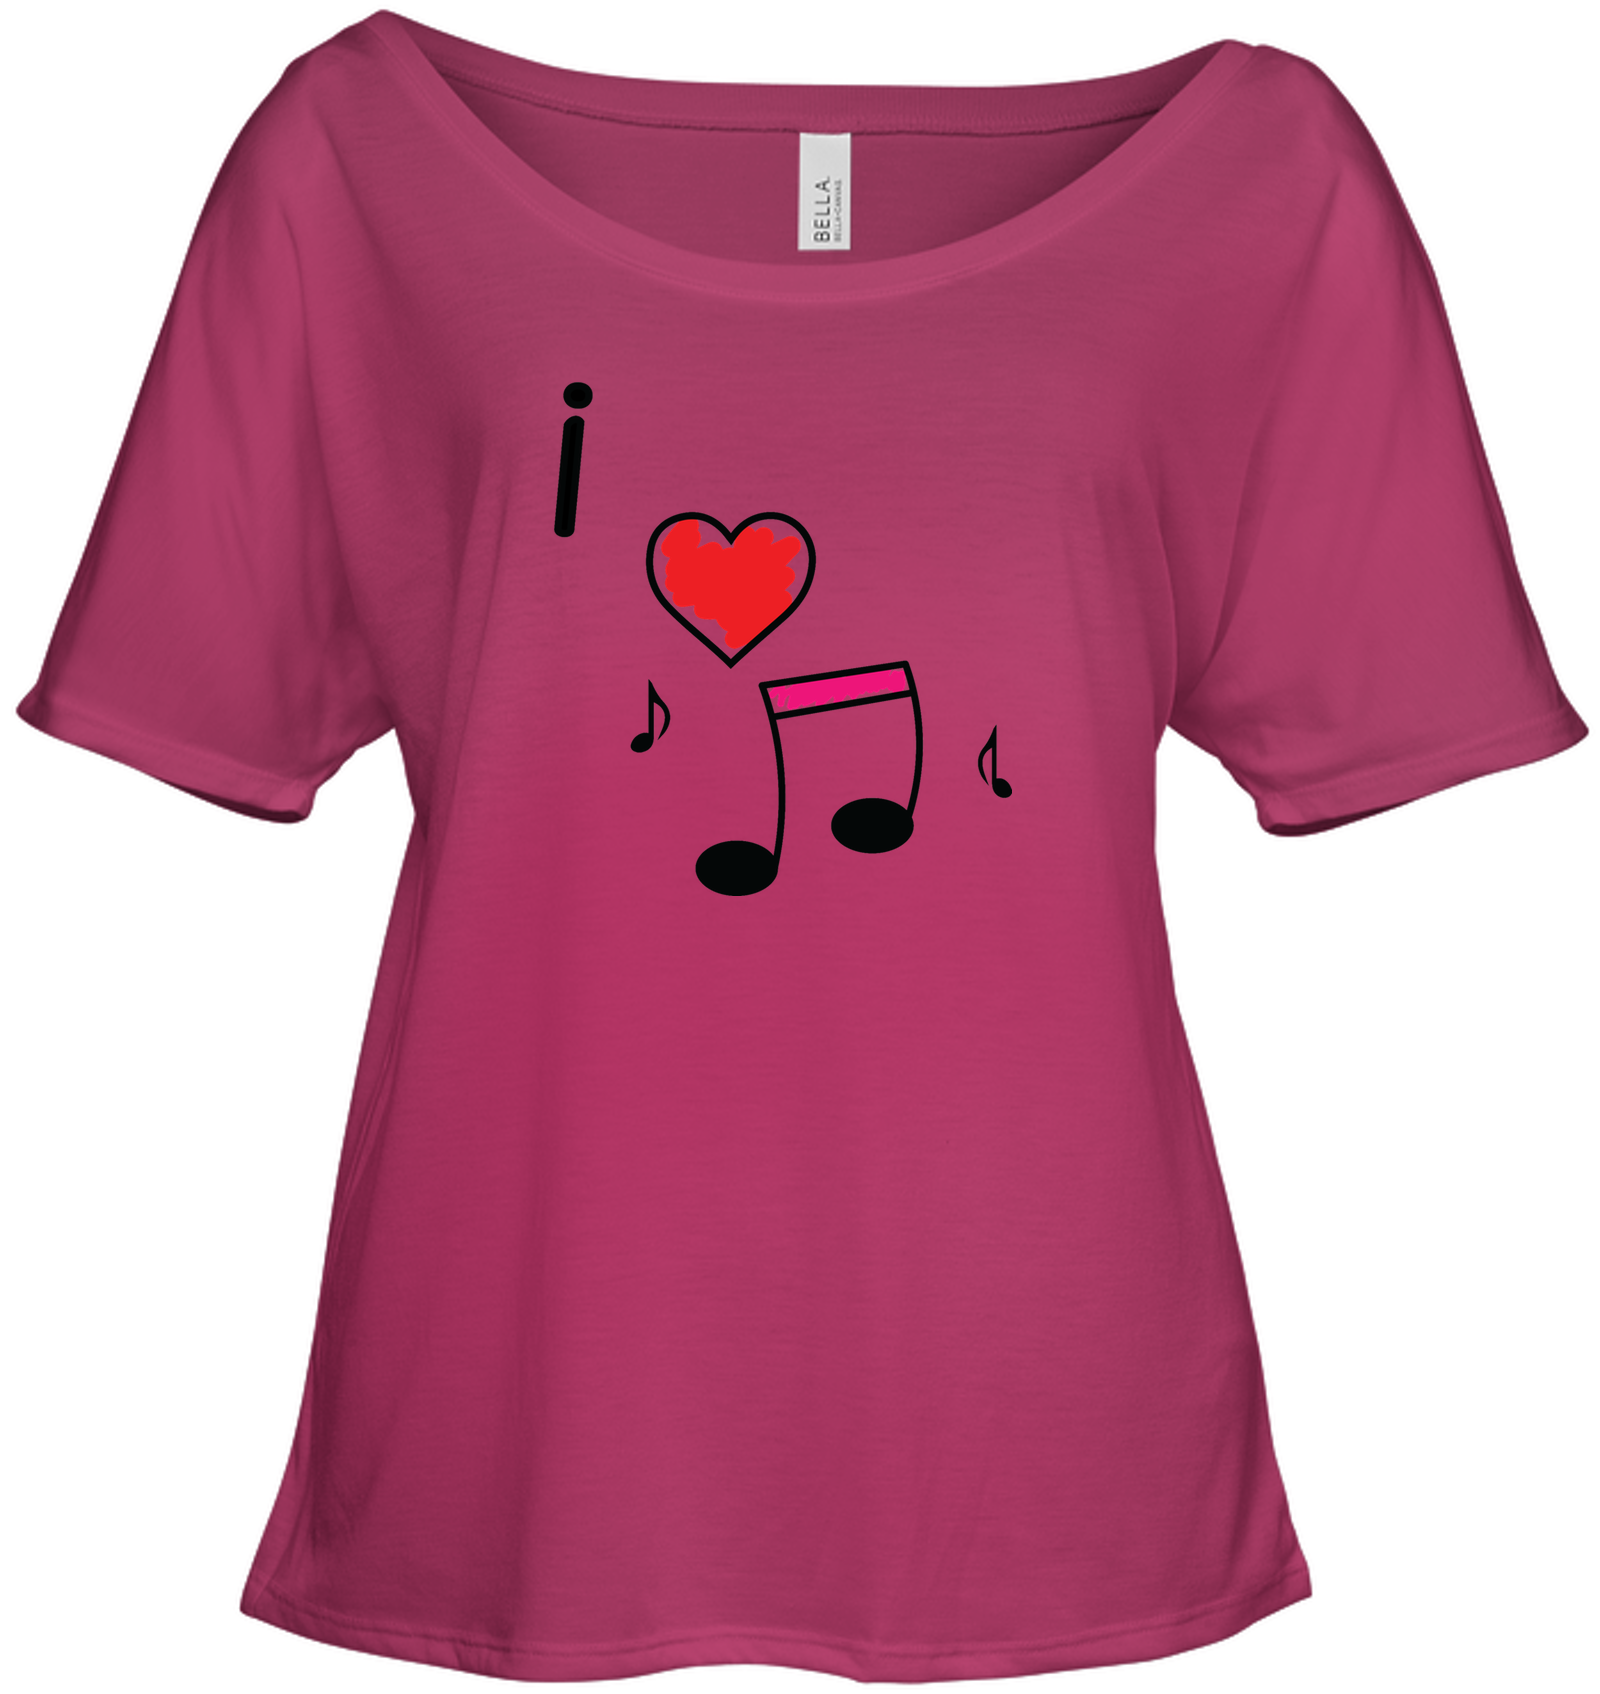 I Love Music Hearts and Fun - Bella + Canvas Women's Slouchy Tee